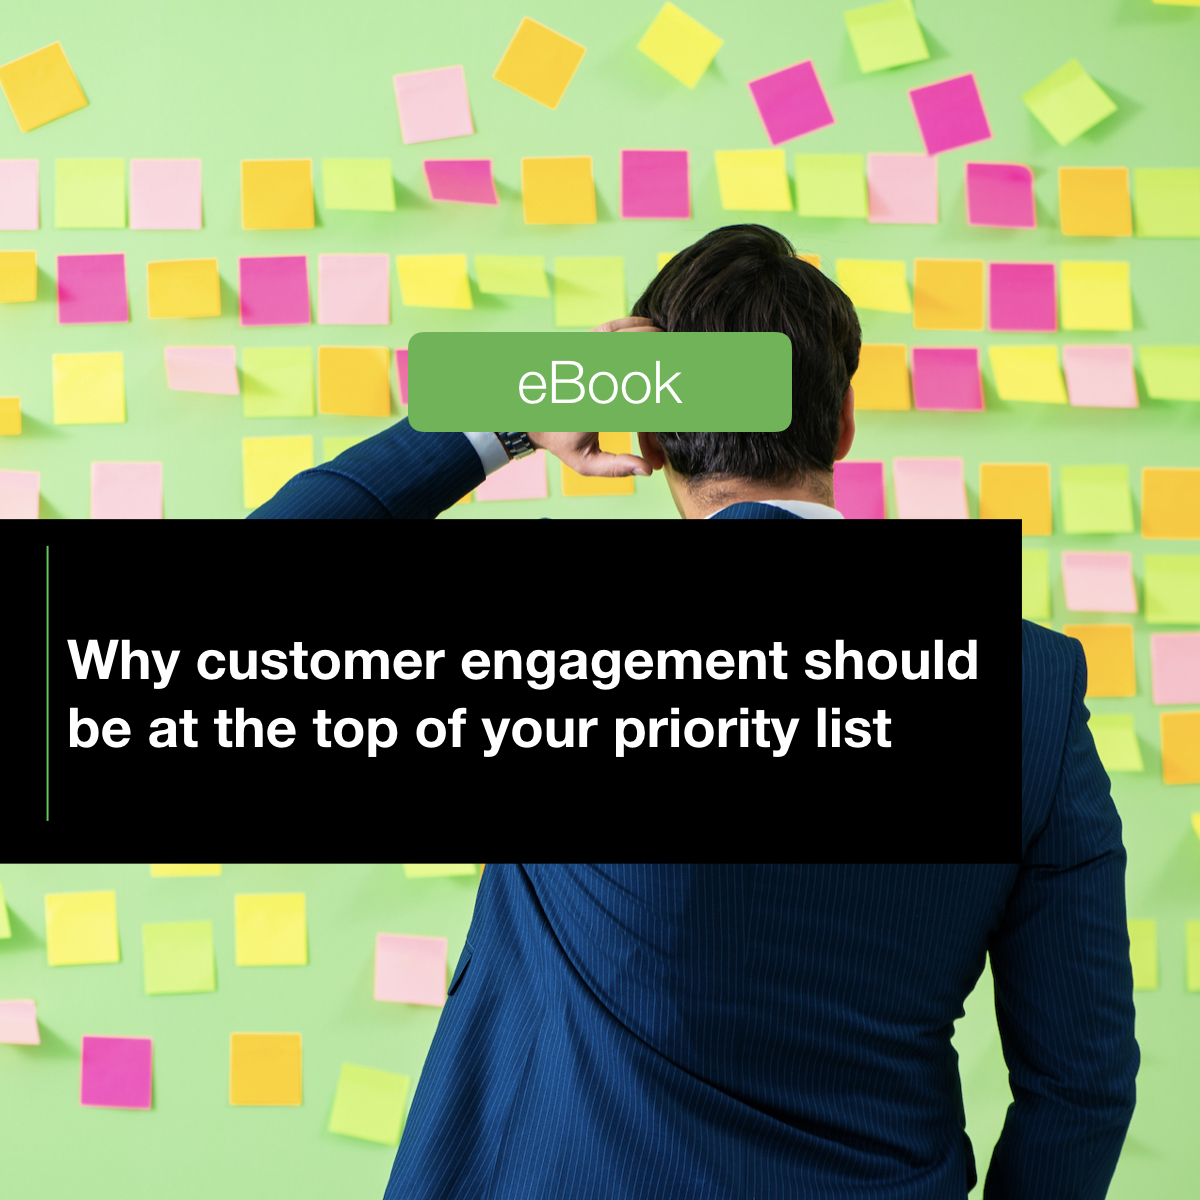 Why customer engagement should be at the top of your priority list